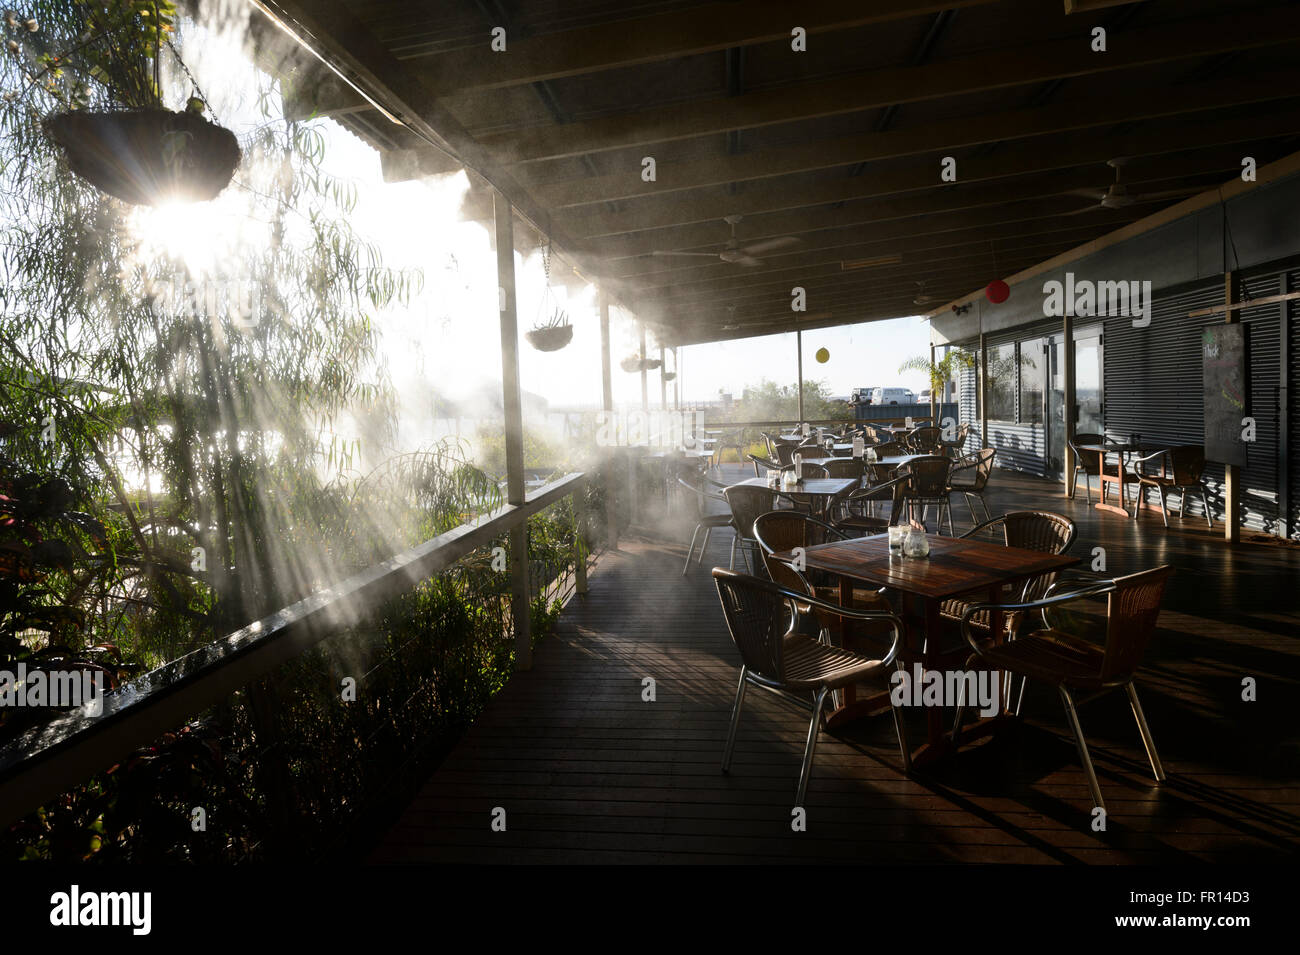 Cooling Mist for Customers at Derby Wharf Restaurant, Derby, Western Australia Stock Photo